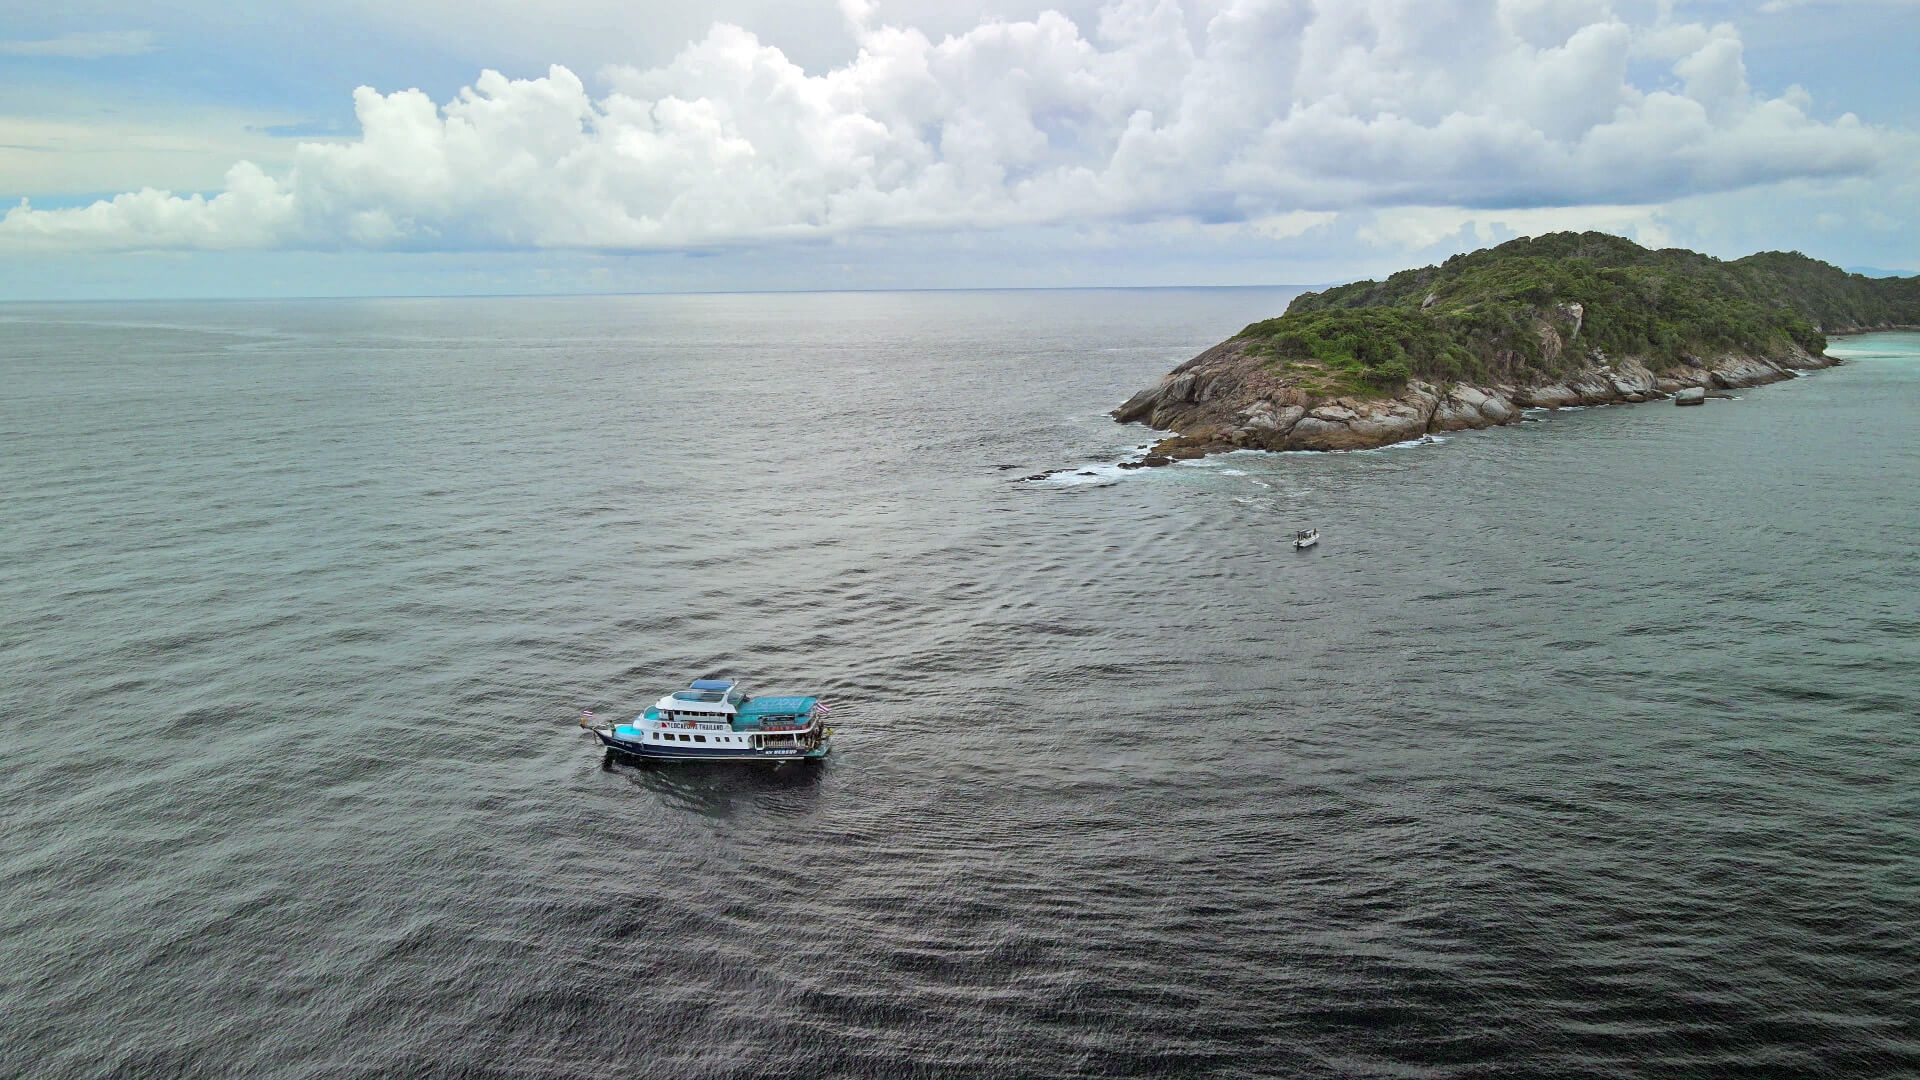 our boat dropping divers at the south tip of racha noi